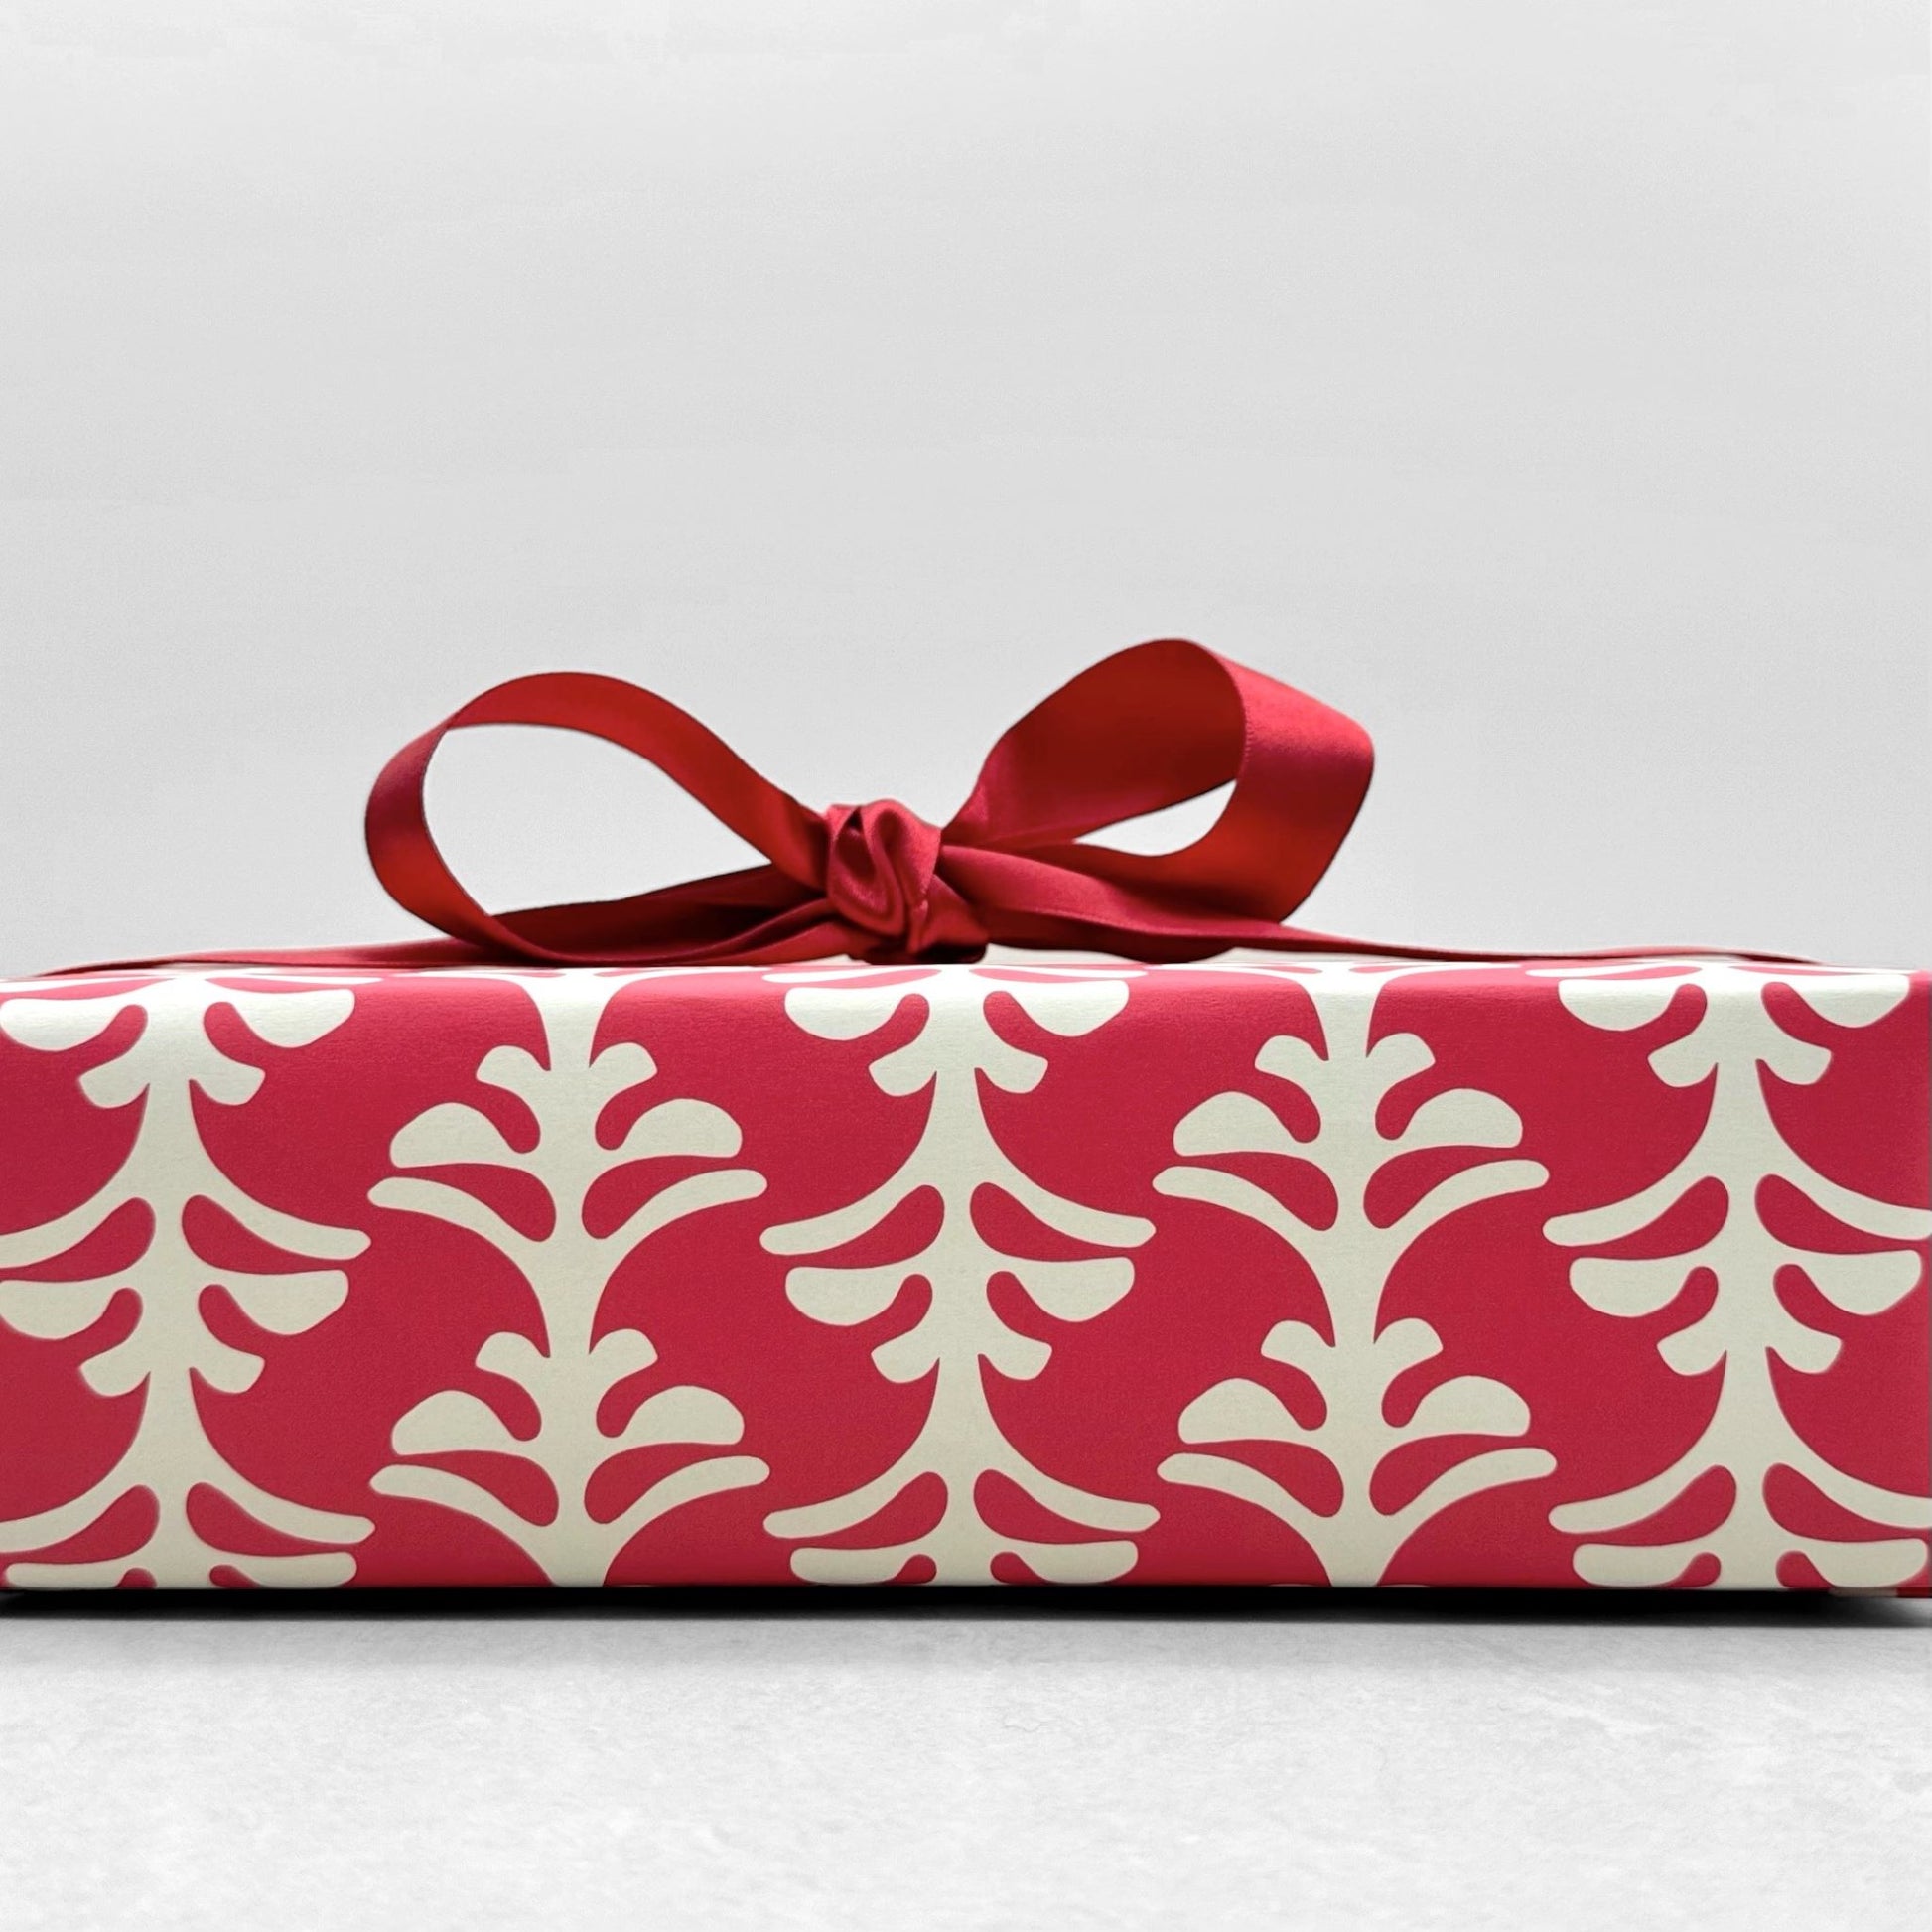 wrapping paper by Otto Editions with a cut-out palm design in white on a hibiscus pink background. Pictured wrapped as a present with a red bow